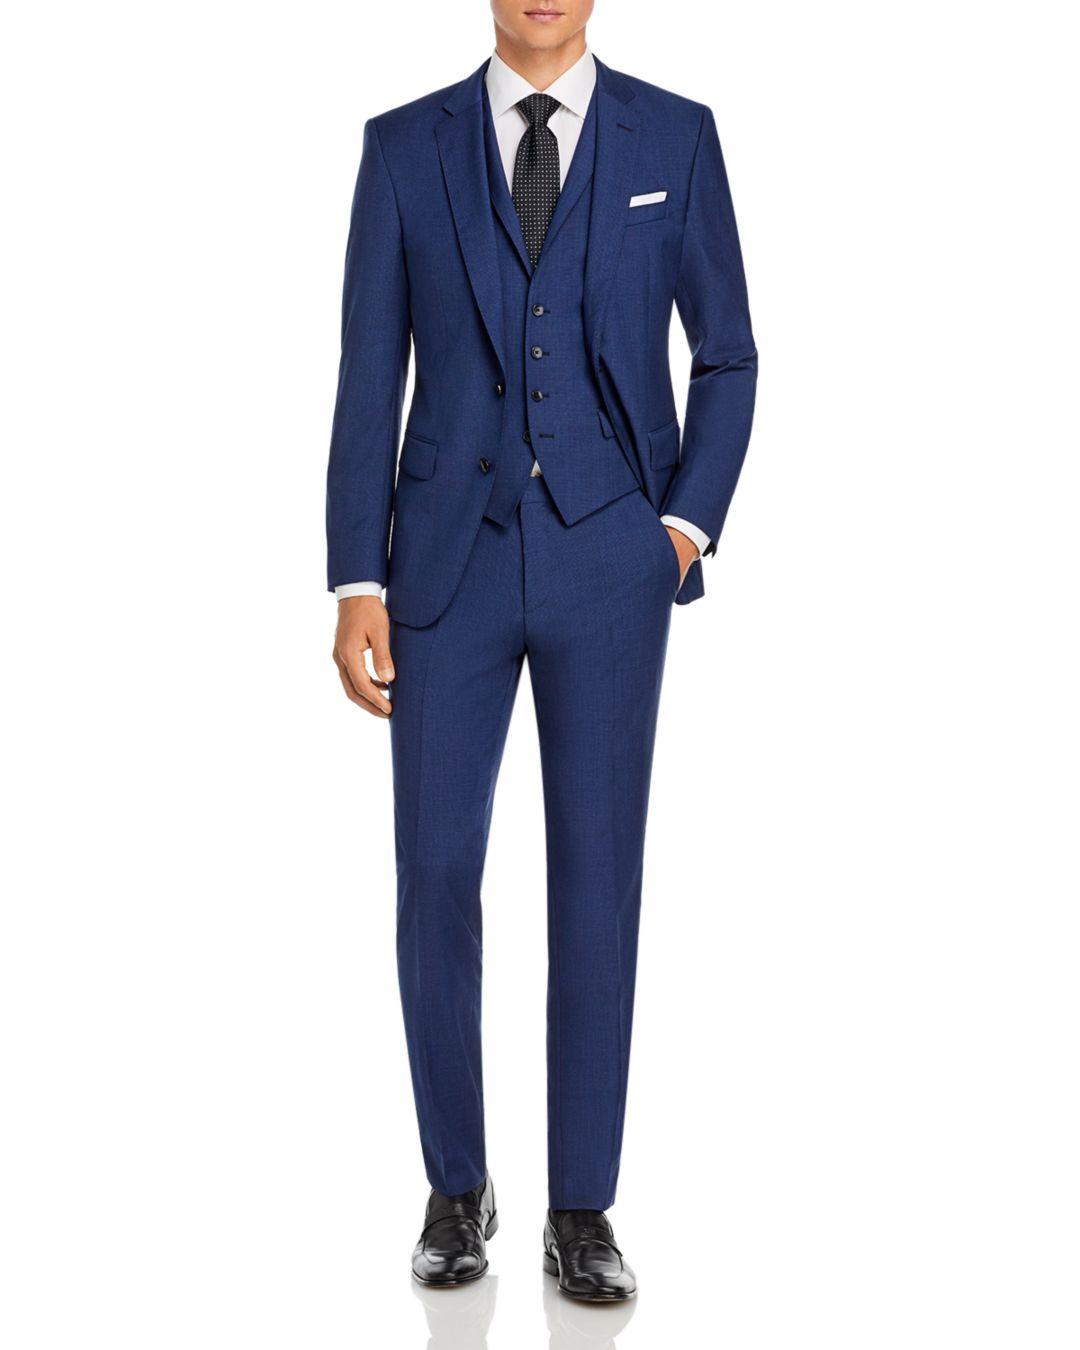 BOSS by HUGO BOSS Synthetic Hutson5/gander3 Solid 3 - Piece Suit in Blue  for Men - Lyst